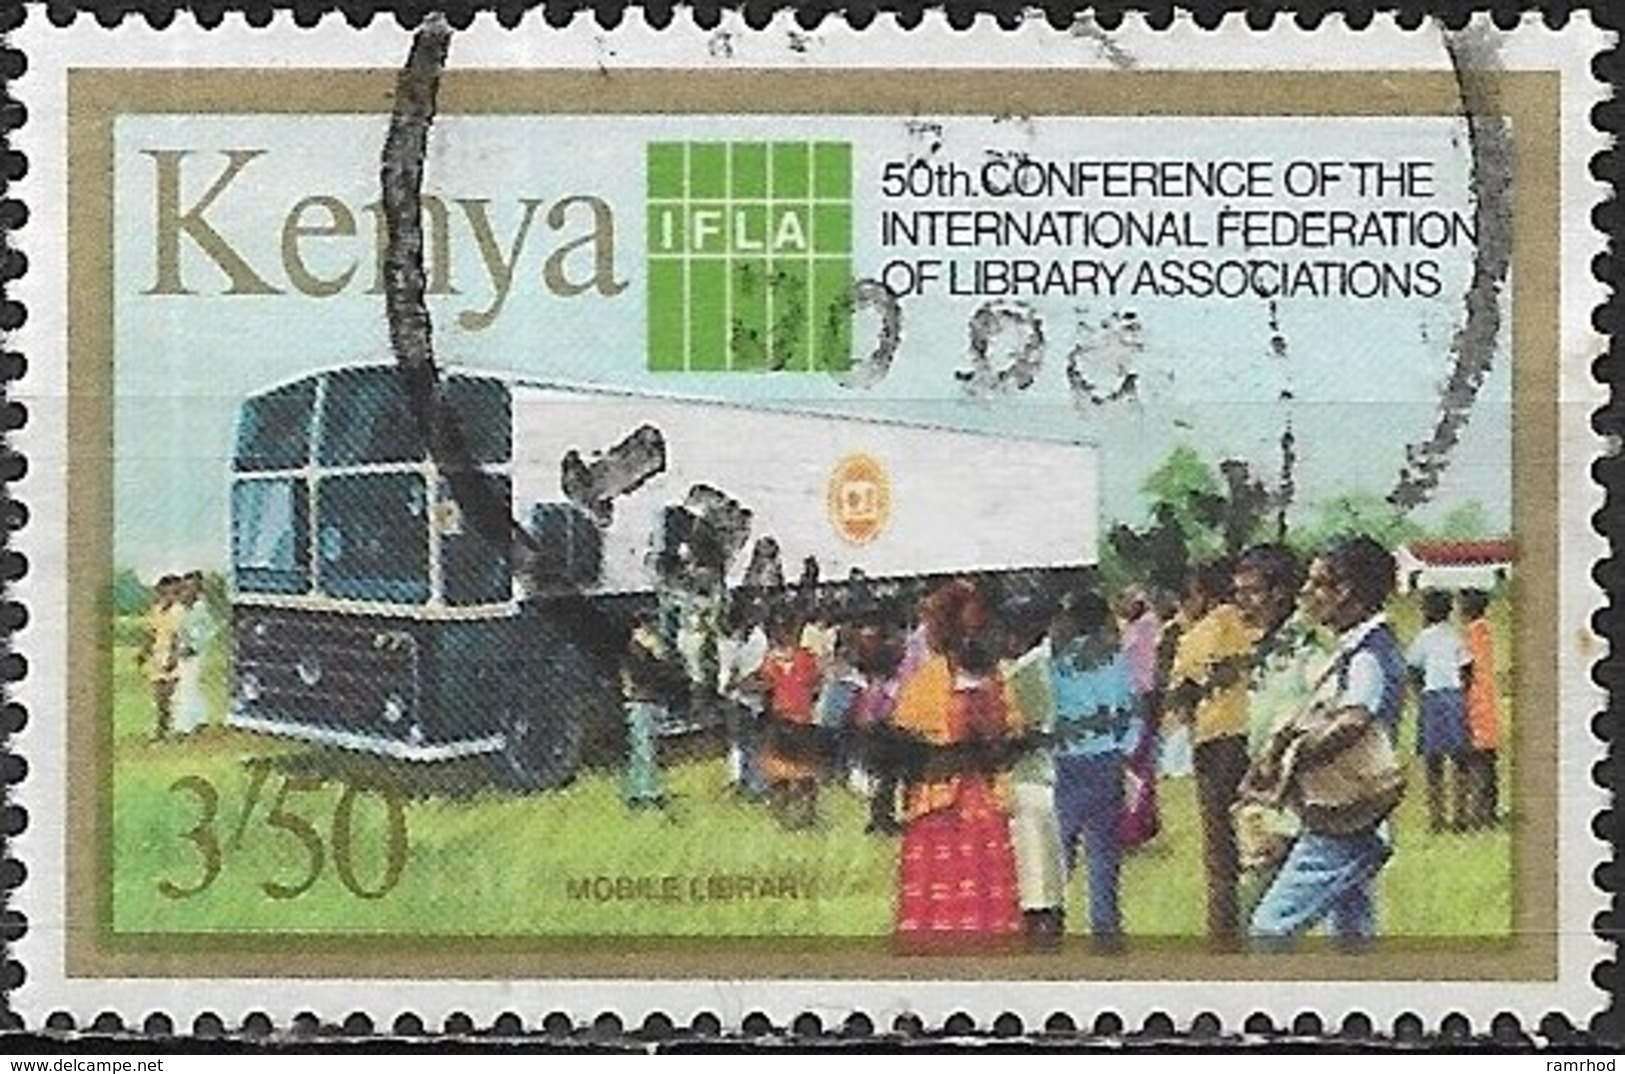 KENYA 1984 50th Conference Of The International Federation Of Library Associations - 3s.50 - Mobile Library FU - Kenya (1963-...)